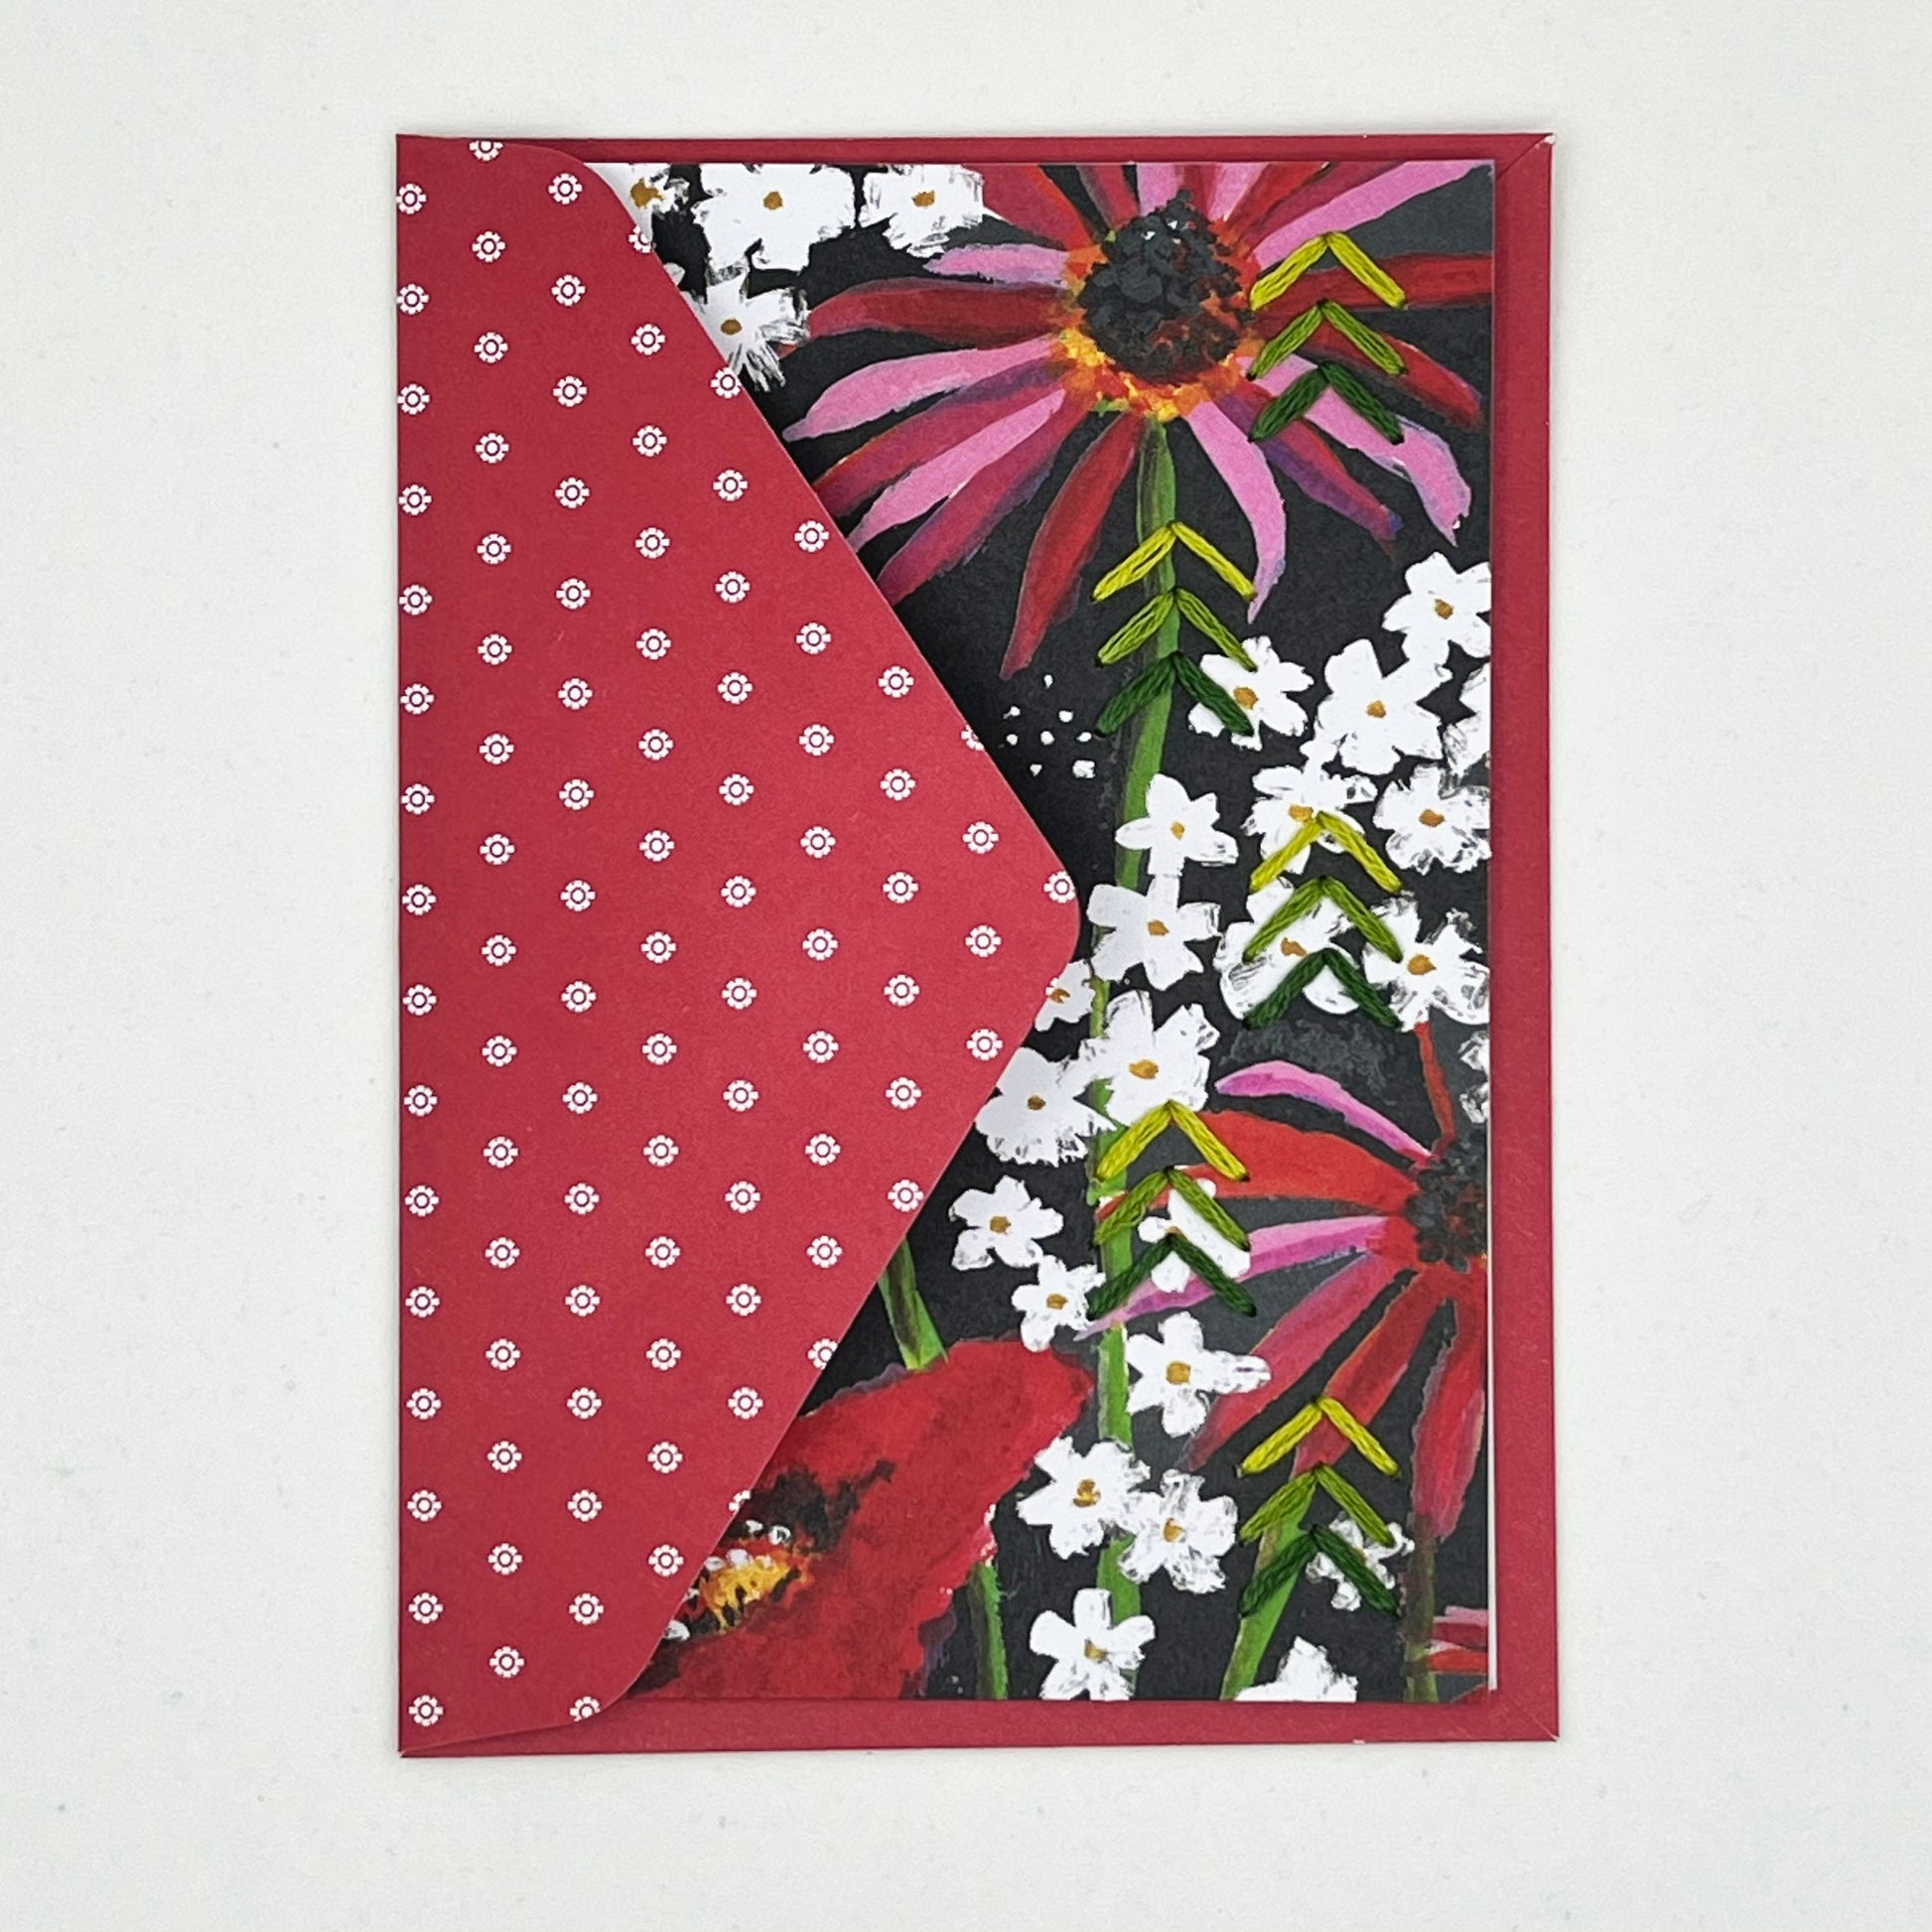 Greeting card tucked into flap of an envelope. artwork of painted flowers in red pink and white. Green stitches of groups of 3 chevrons to create abstract pine tree shape